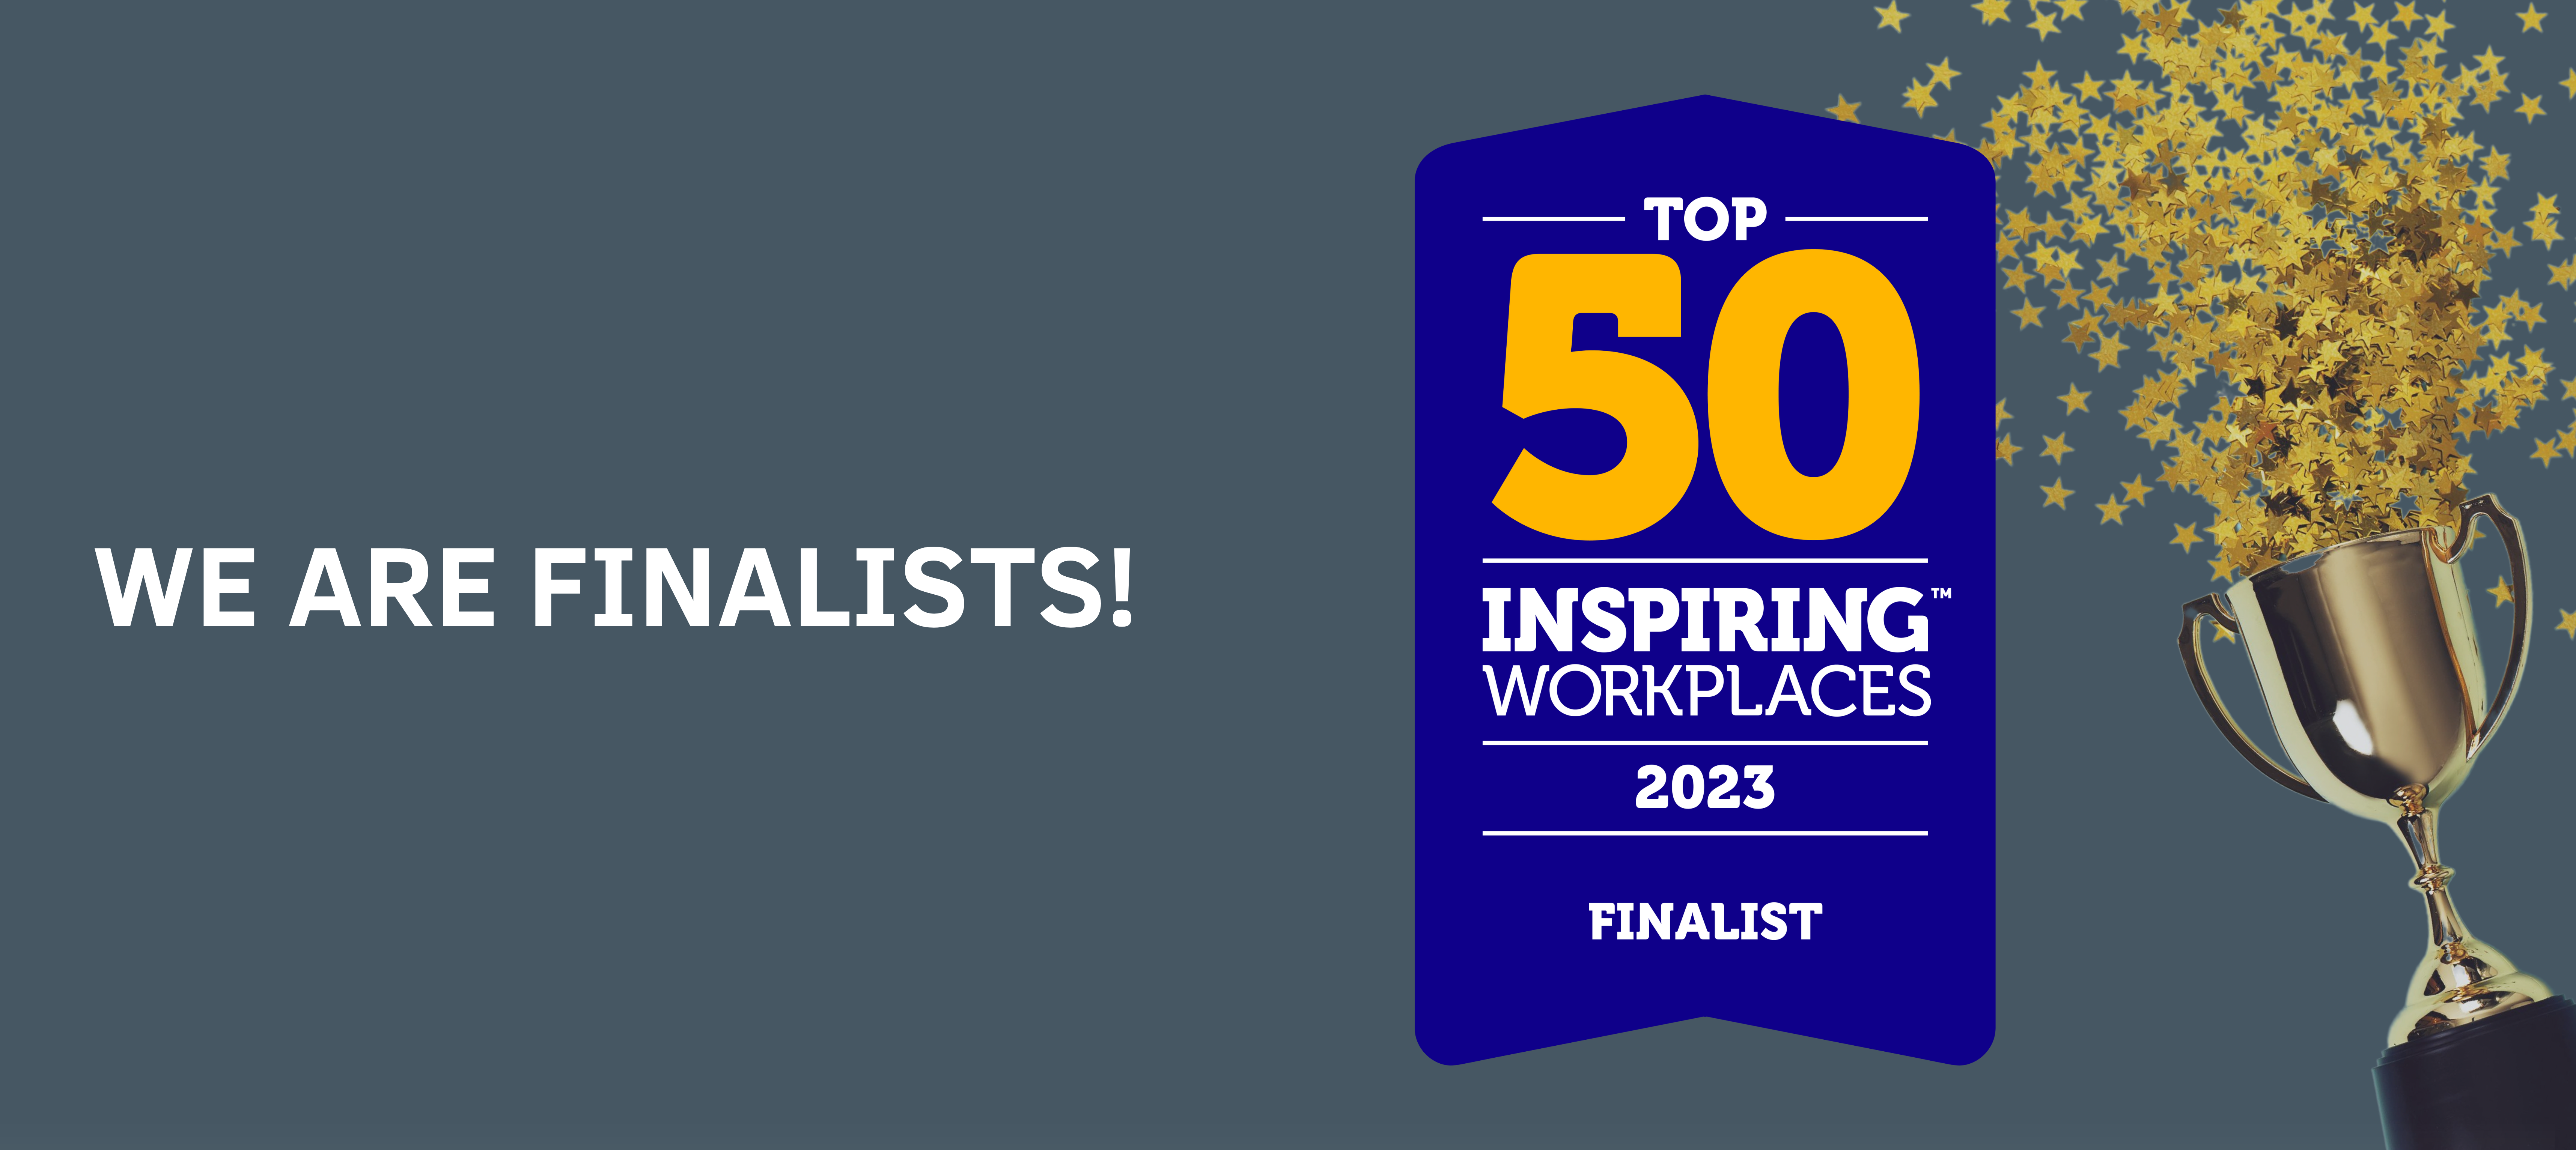 Inspiring workplaces 2023 finalists